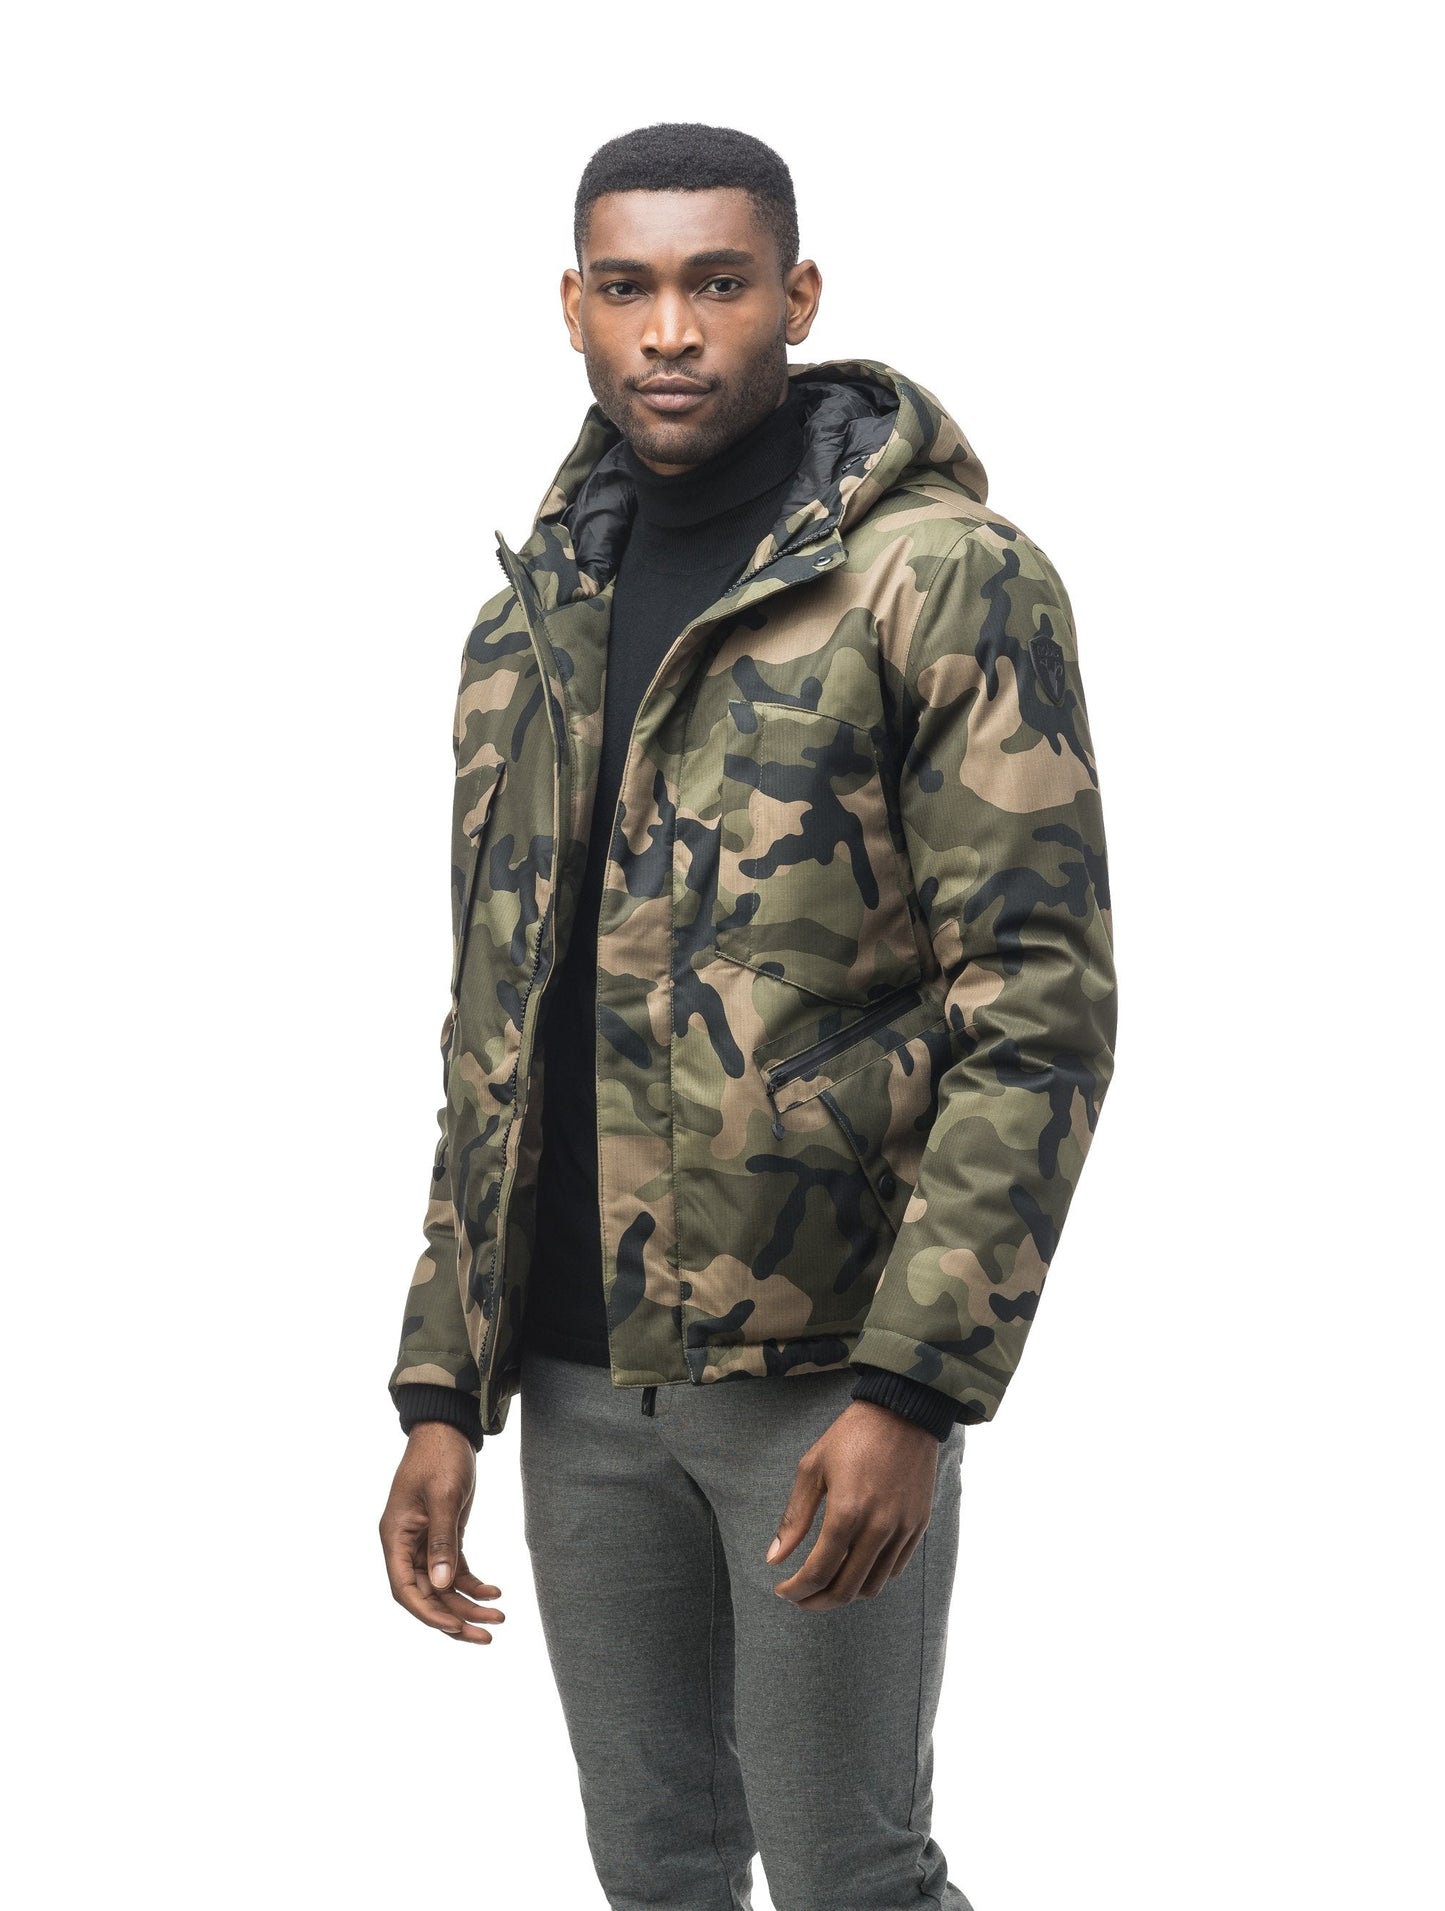 Men's waist length light down coat equipped with six exterior pockets and a hood in Camo